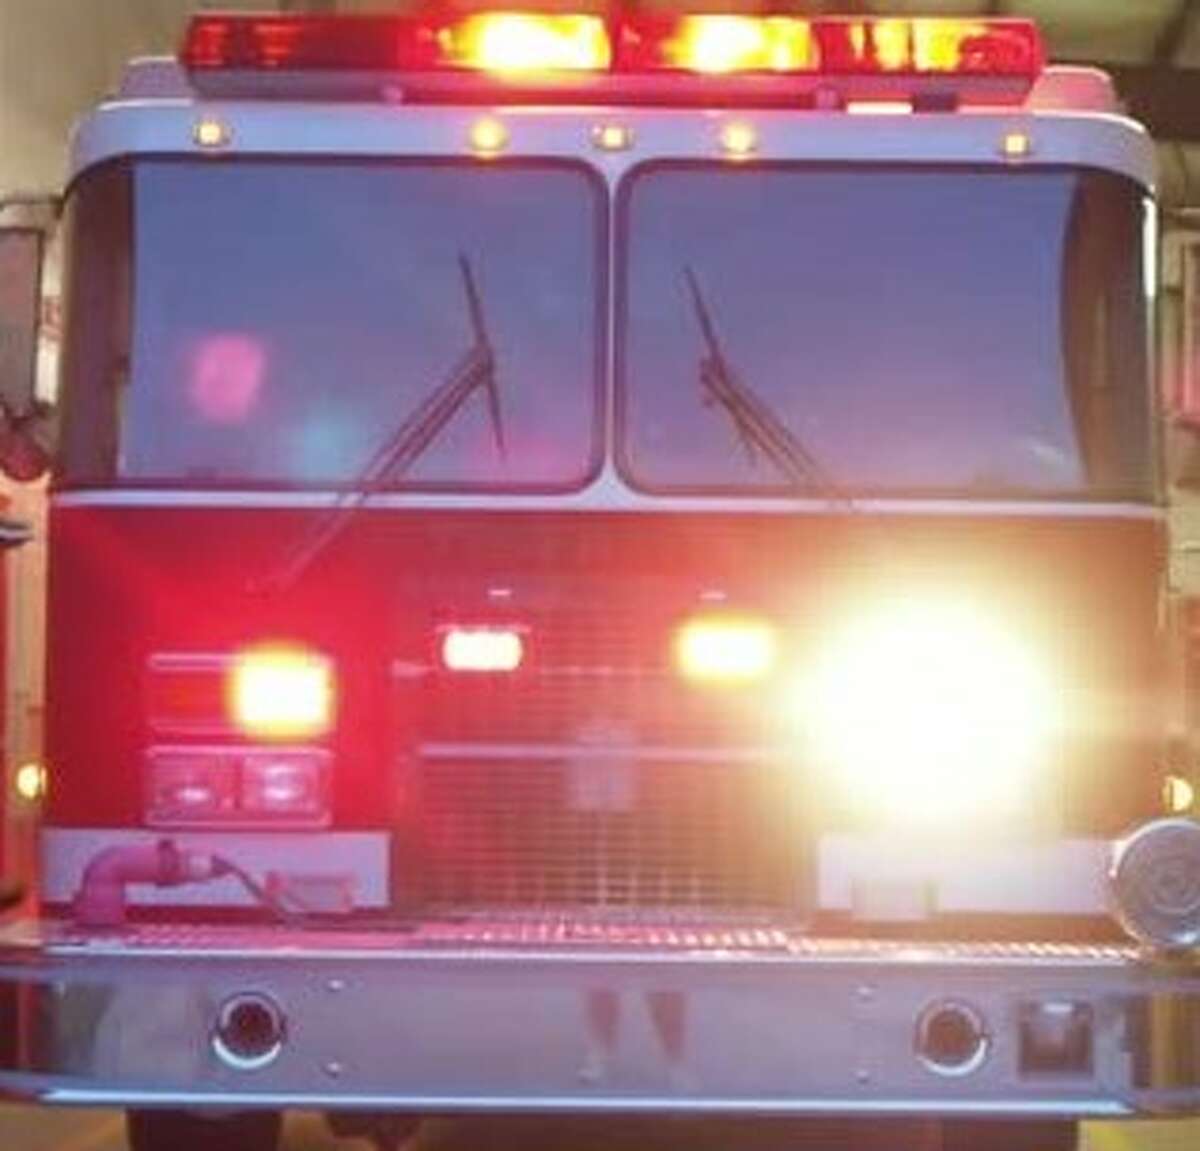 Firefighters from five departments responded to a house fire in Wood River Saturday afternoon.